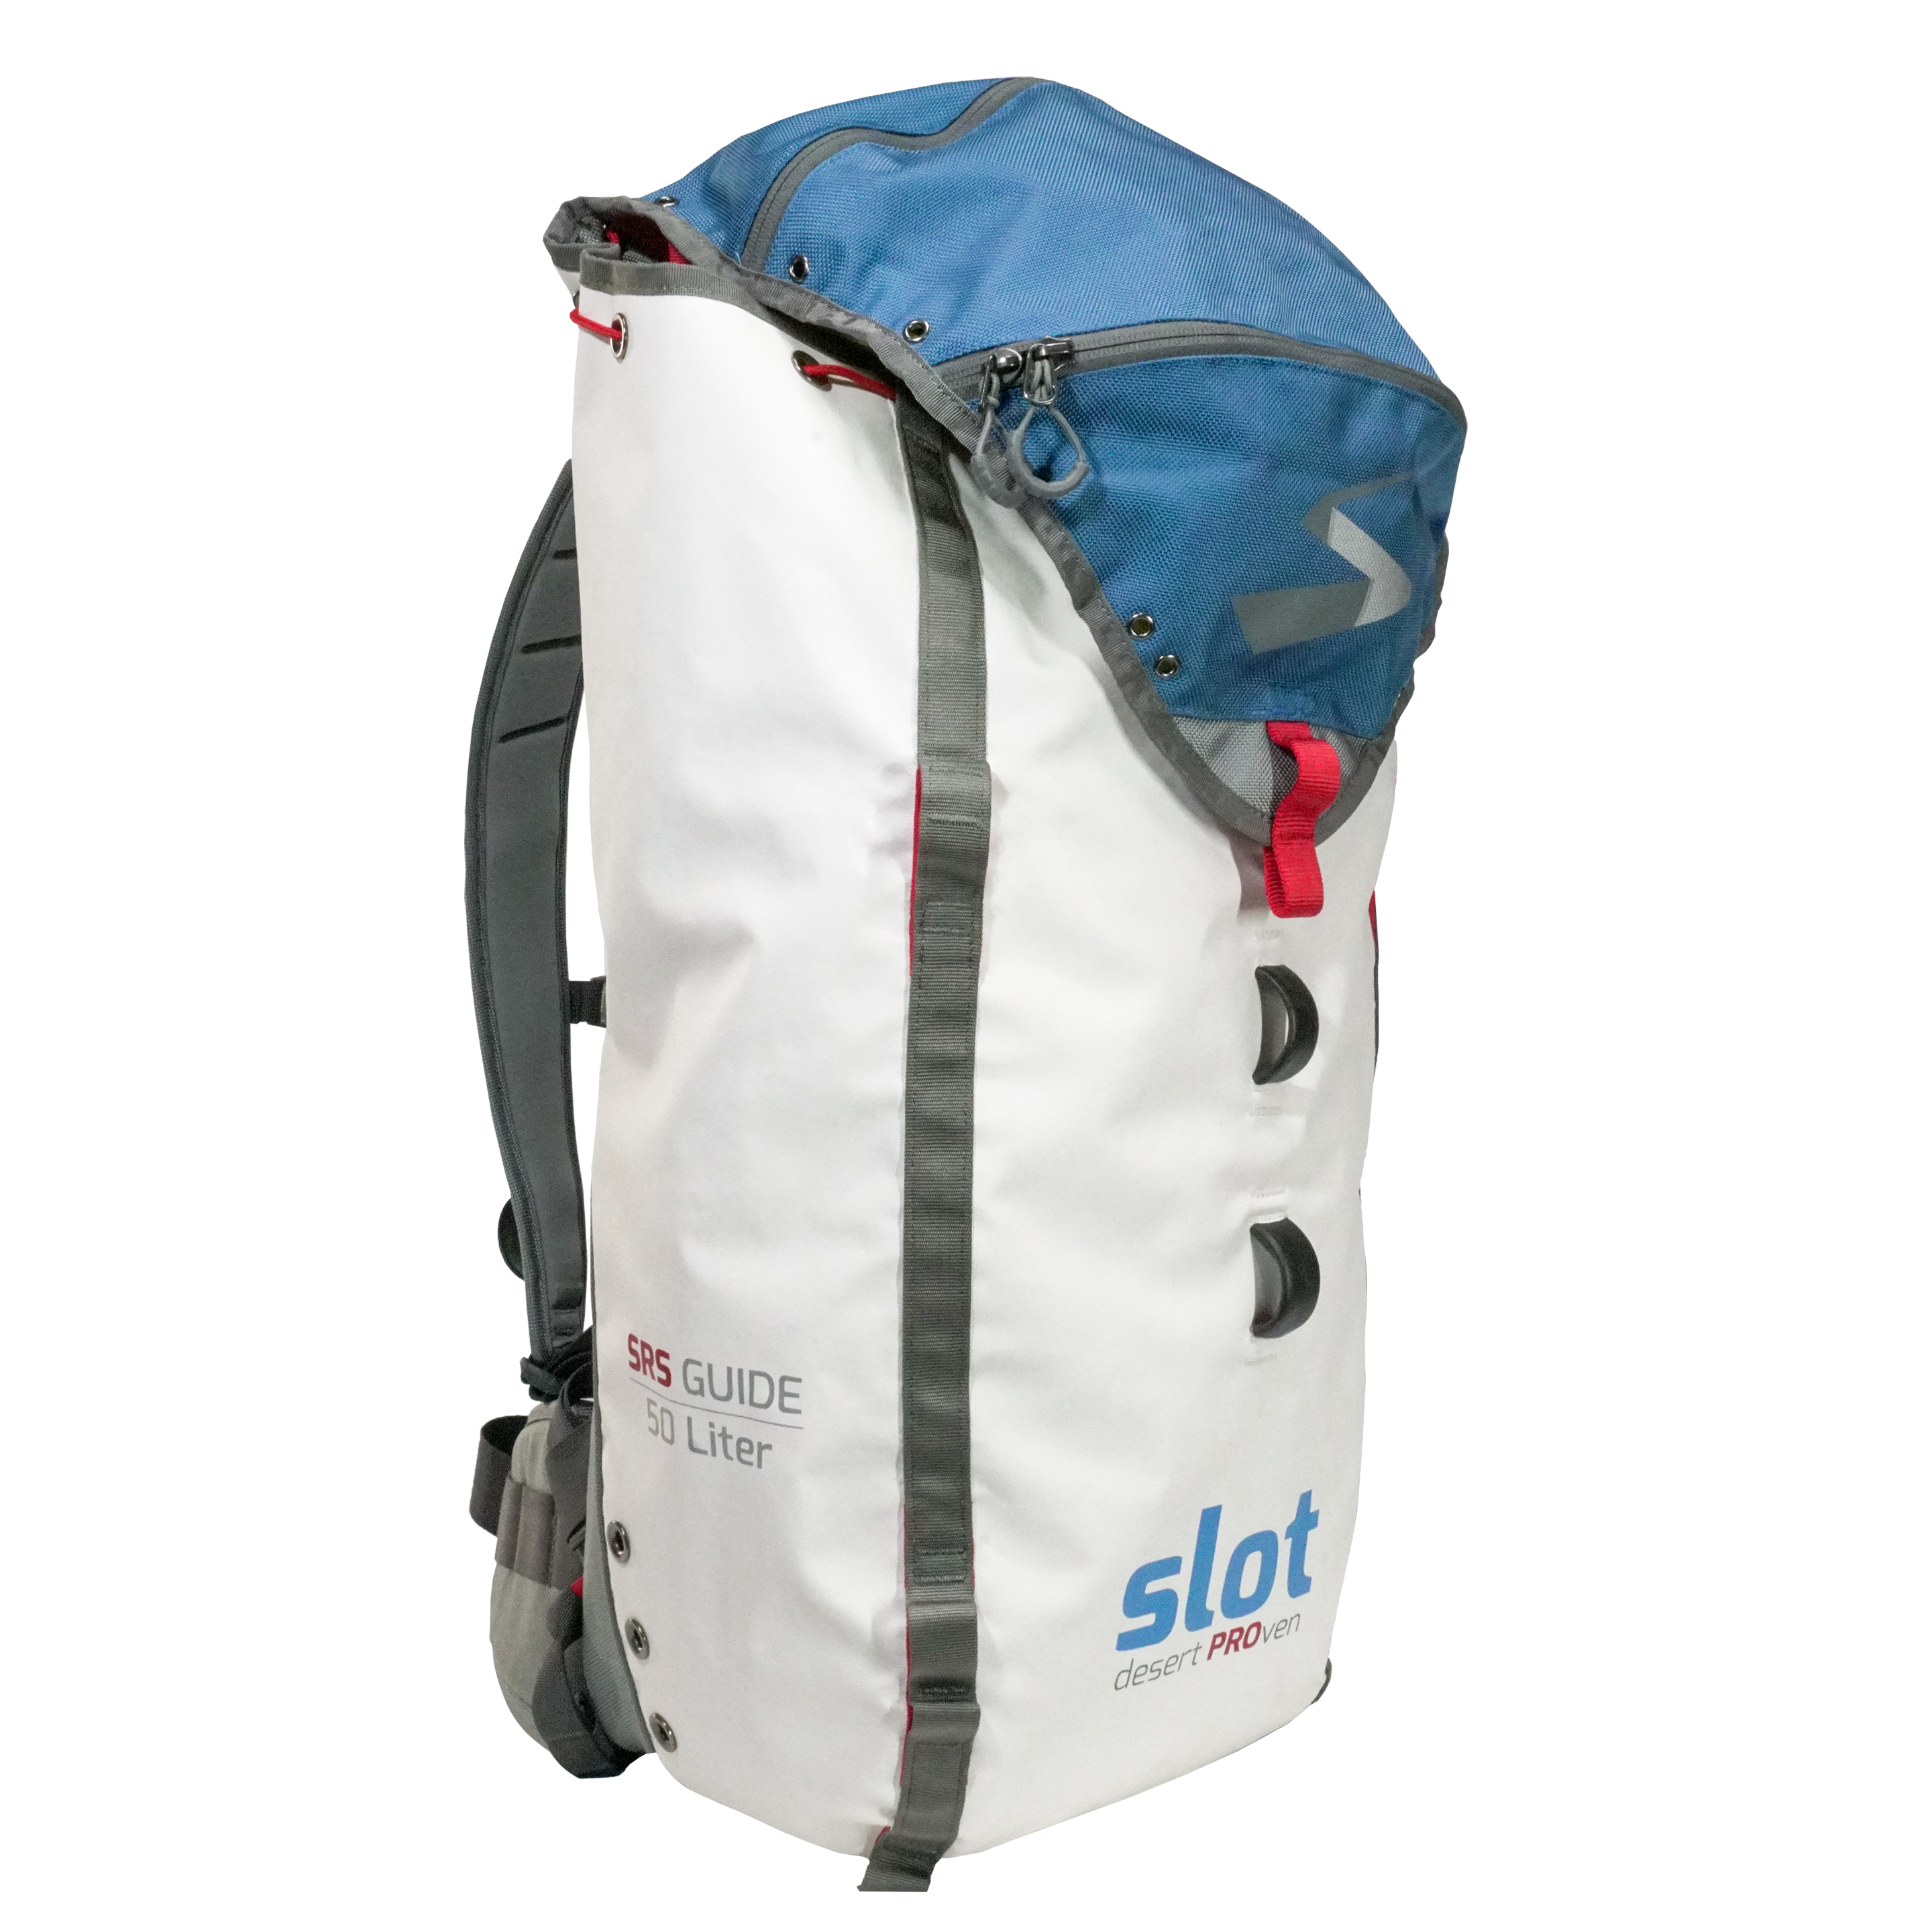 Engineered to optimize rope management in multi-person guided canyoneering situations, this pack proved to increase the pace and optimize safety. At 50 liters, it has room for daily supplies, extra belay ropes, and group safety gear.  In non-guided applications, this backpack is a great choice for multi rope routes, overnights, or when more than the essentials are needed. It is equally at home rock climbing at the Creek, technical pack raft portages